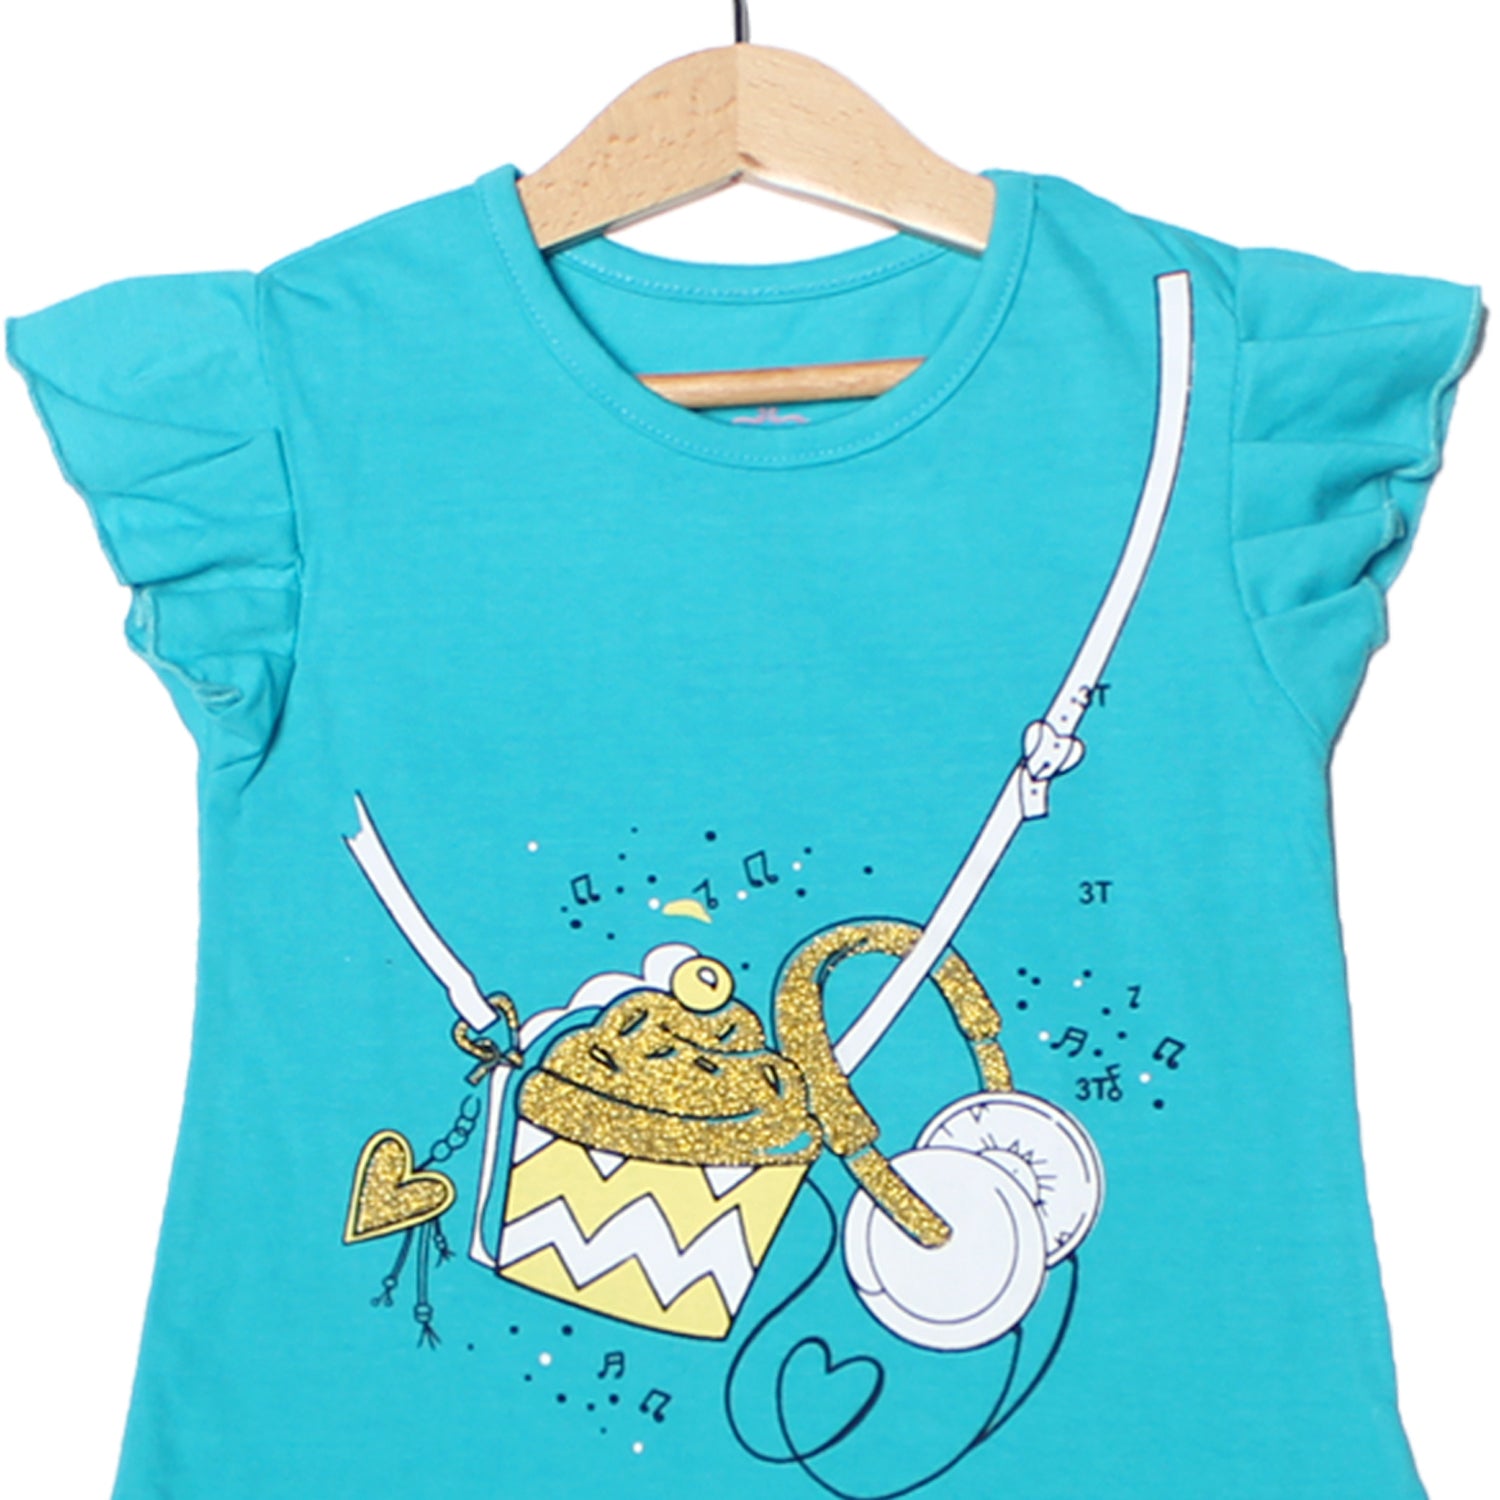 NEW TEAL BLUE MUFFIN PRINTED T-SHIRT TOP FOR GIRLS